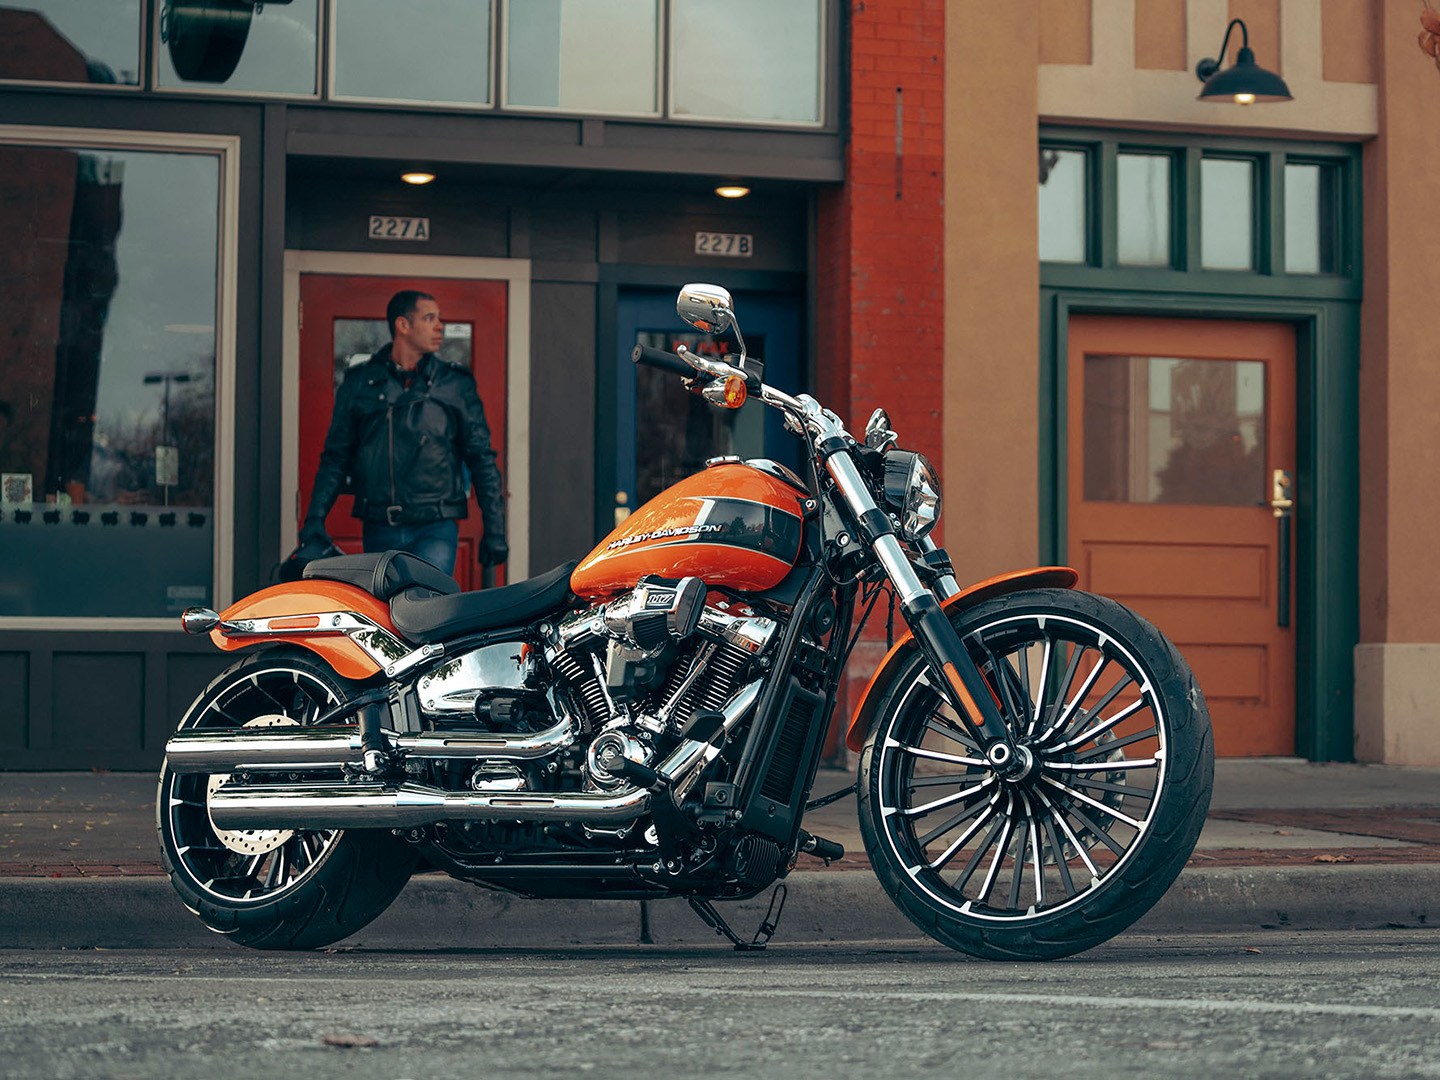 2023 Harley-Davidson Breakout® in Knoxville, Tennessee - Photo 4